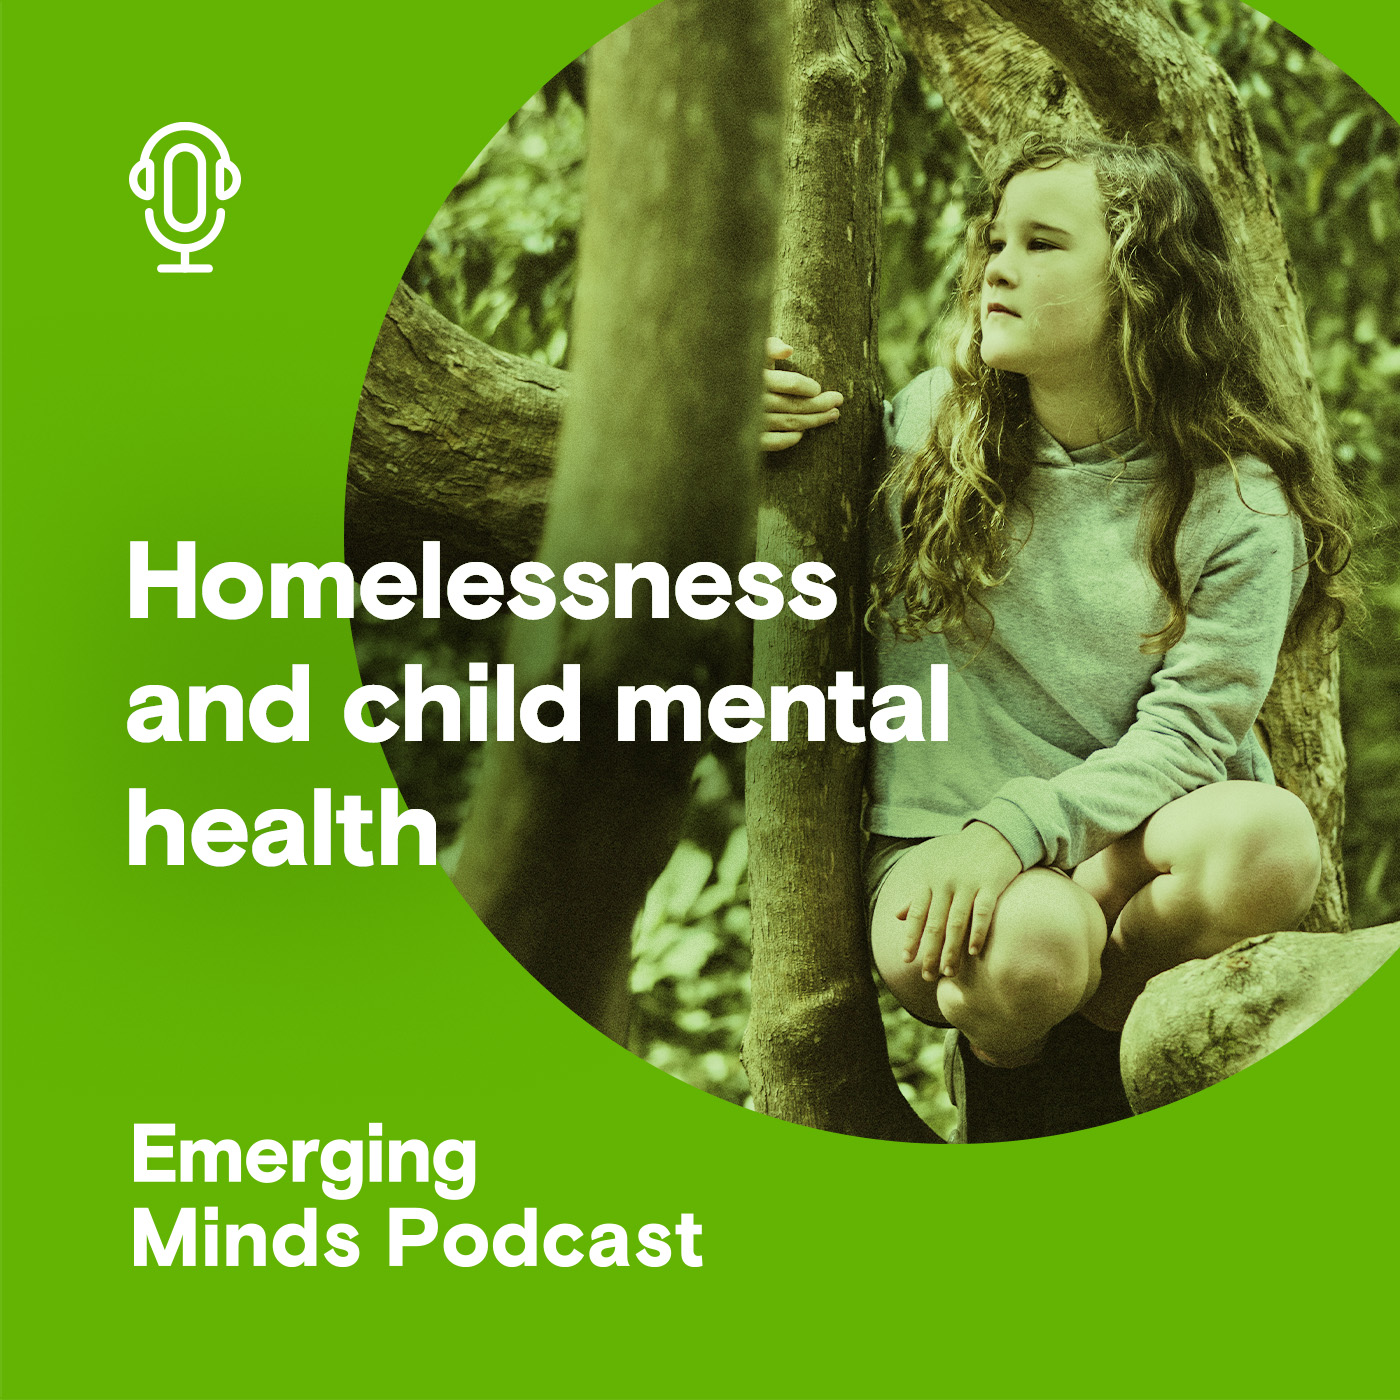 Homelessness and child mental health